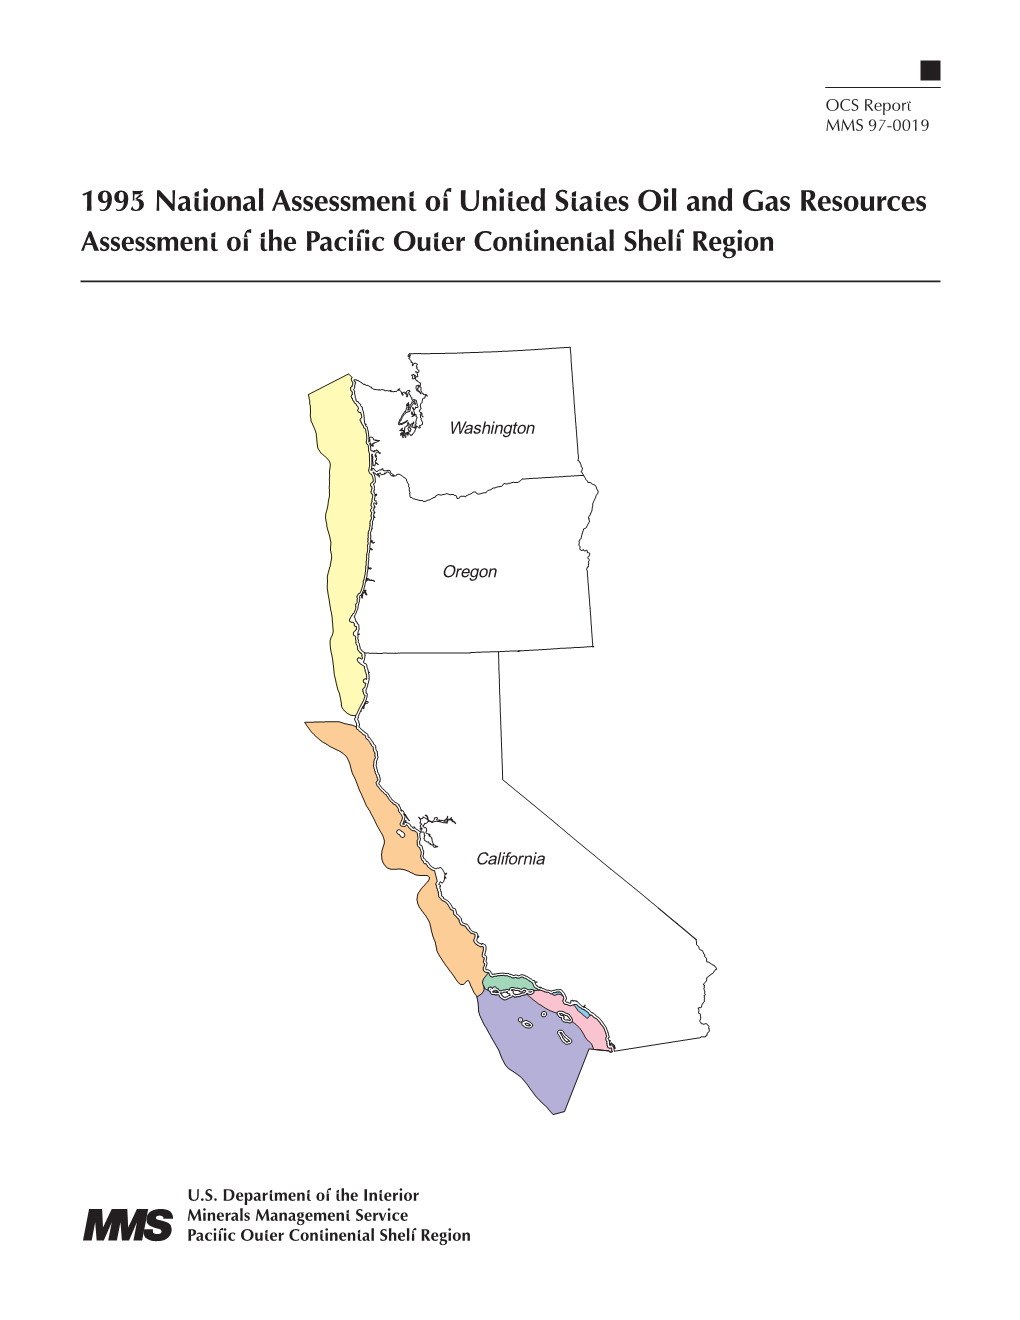 1995 National Assessment of United States Oil and Gas Resources Assessment of the Pacific Outer Continental Shelf Region